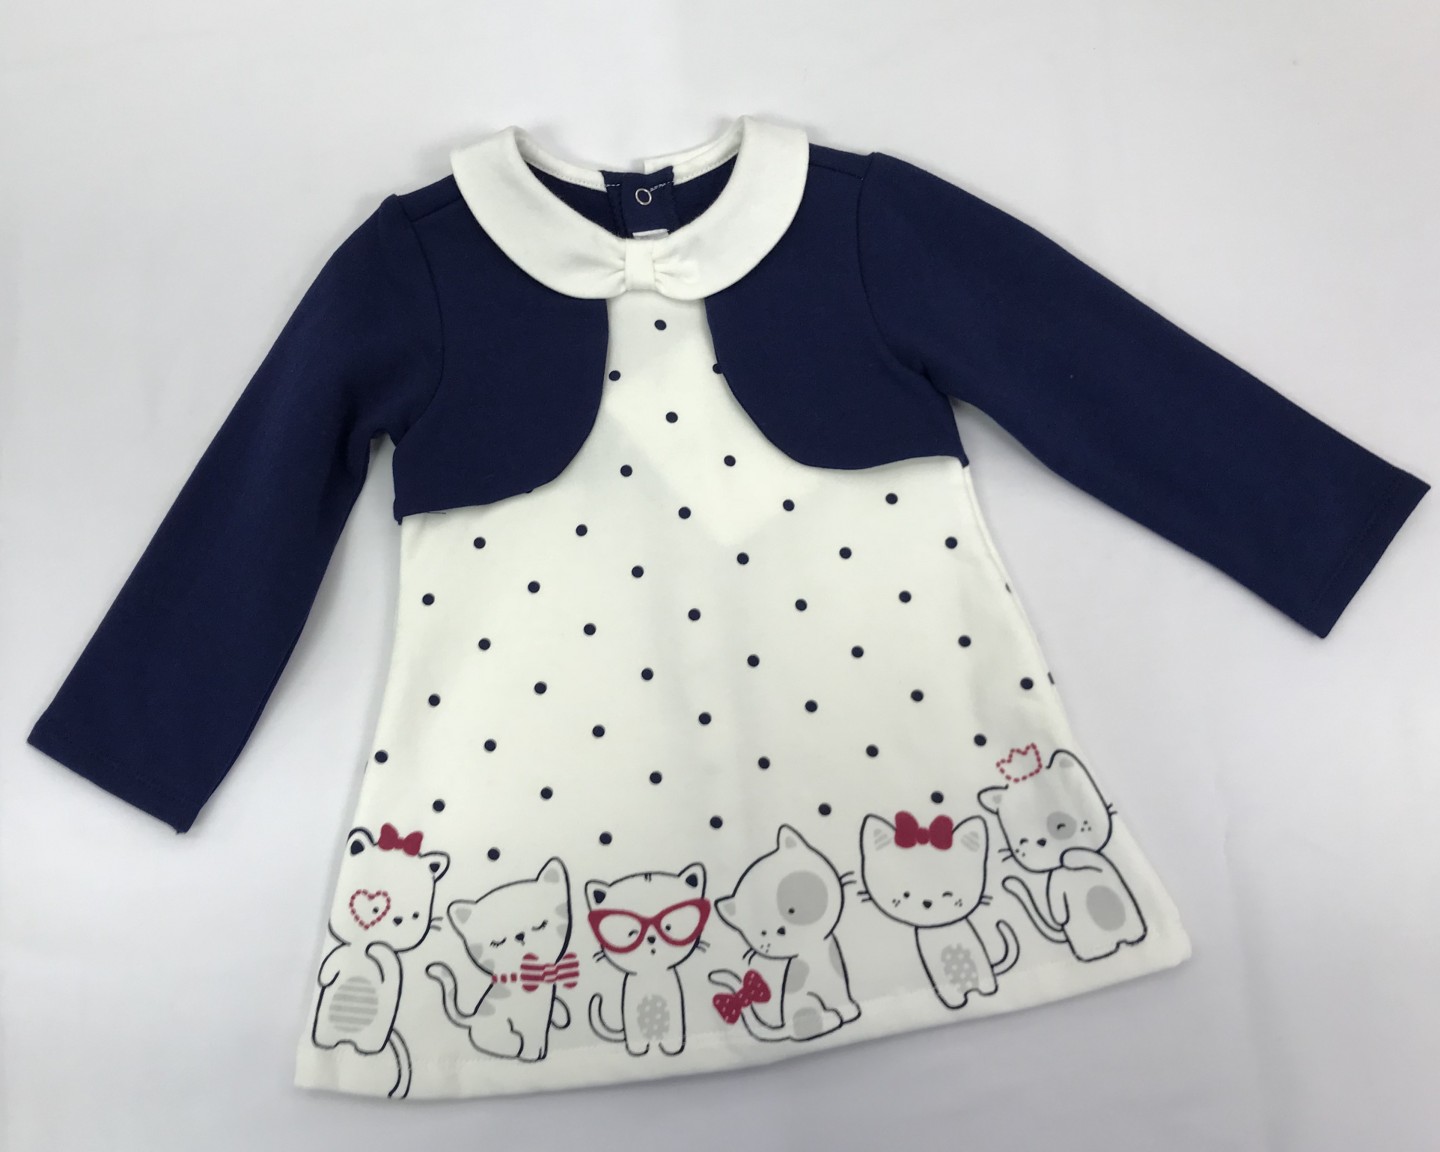 MAYORAL 2818 BLUE AND WHITE POLKA DOT KITTY DRESS WITH JACKET